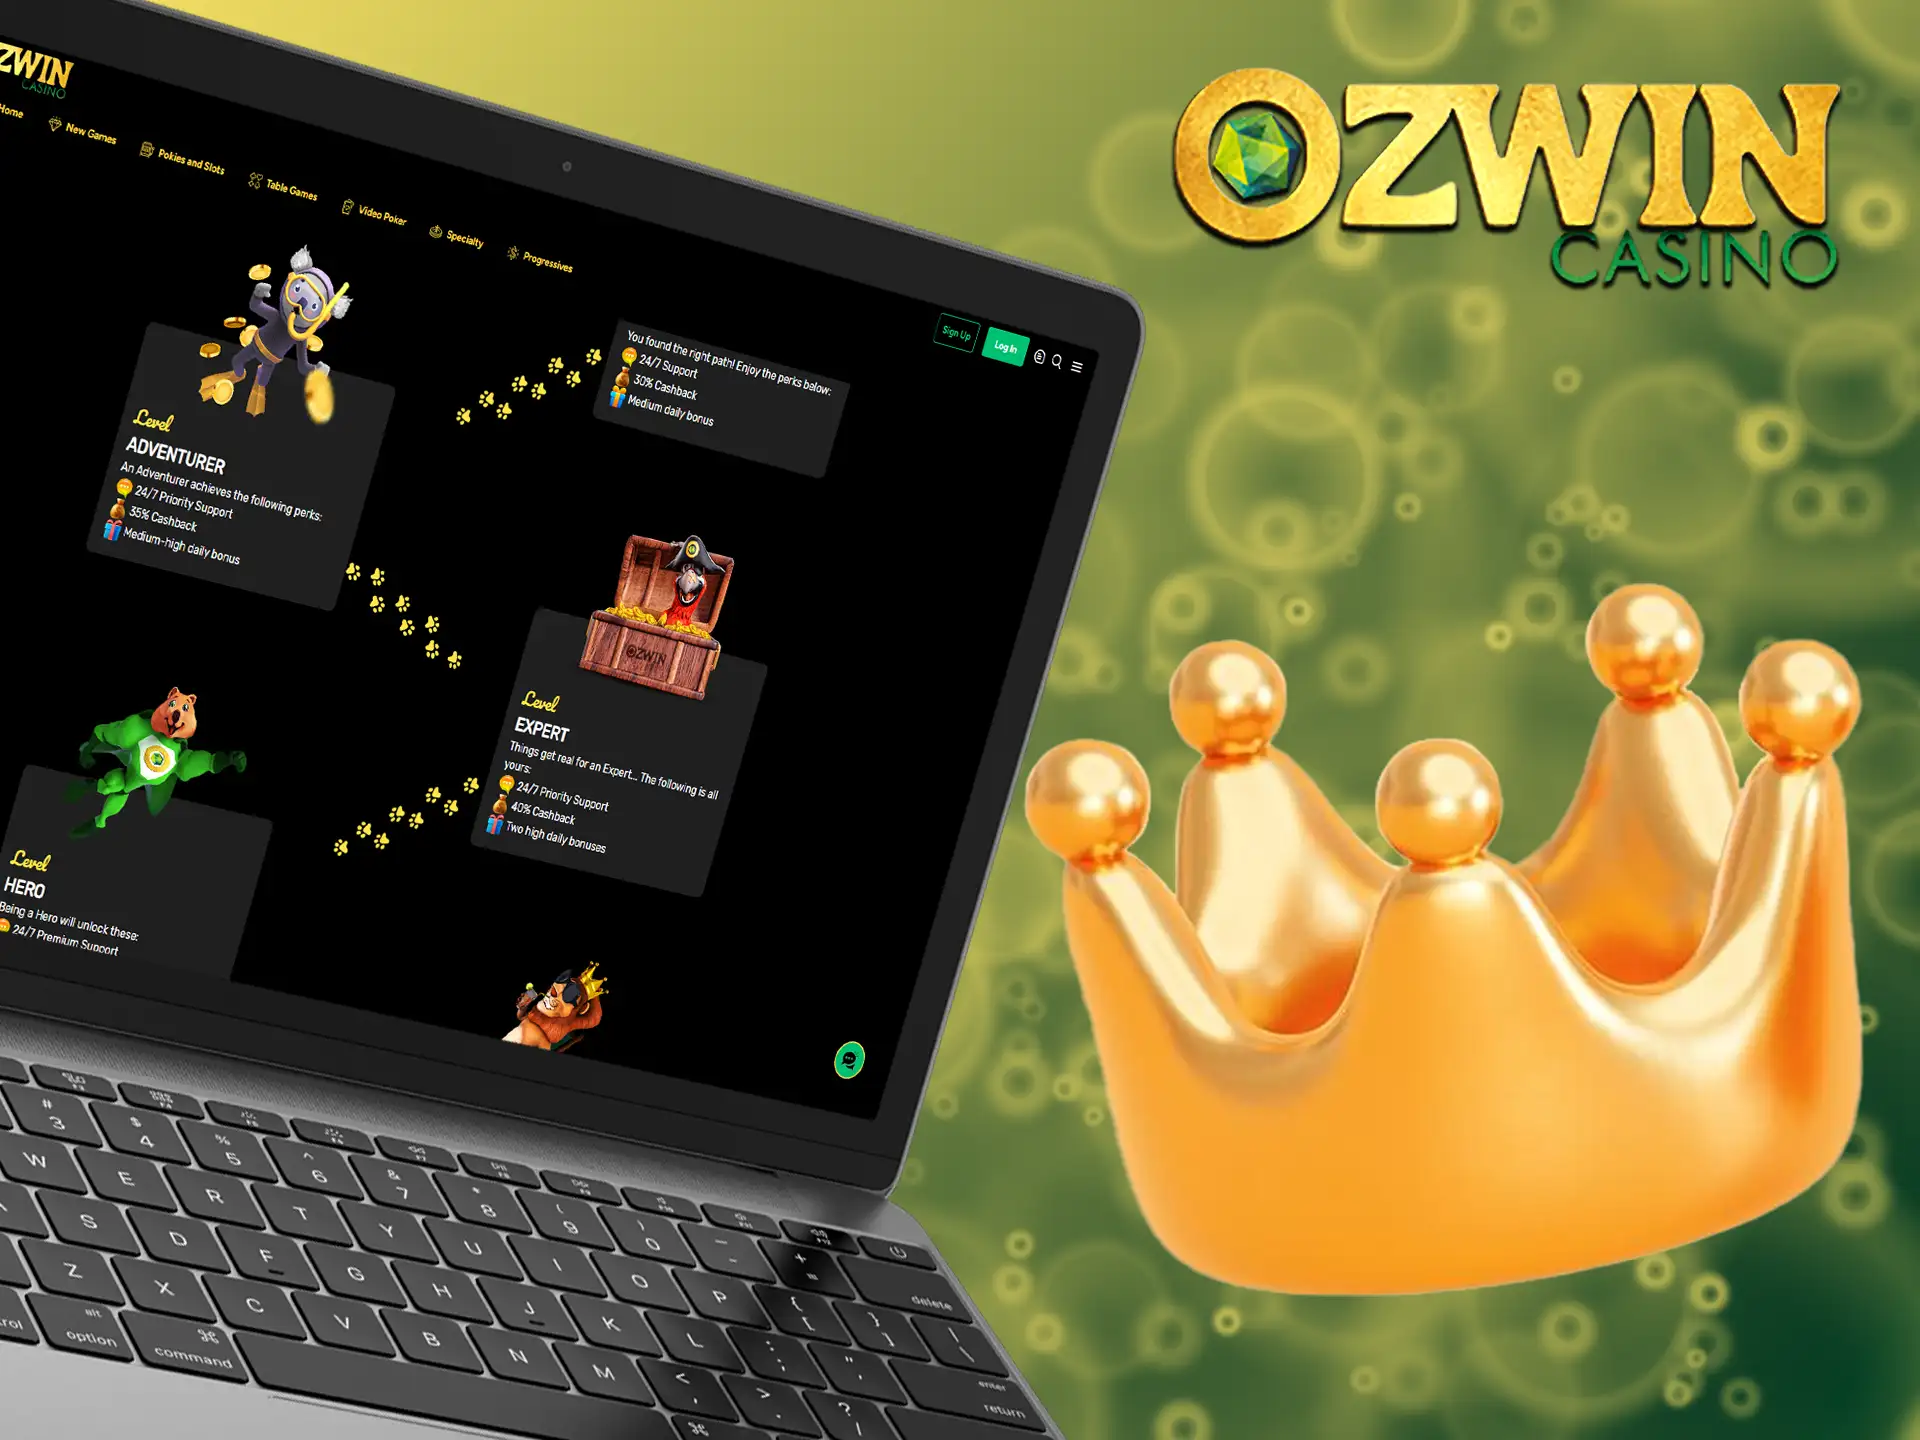 Complete registration and join Ozwin VIP program with special rewards.